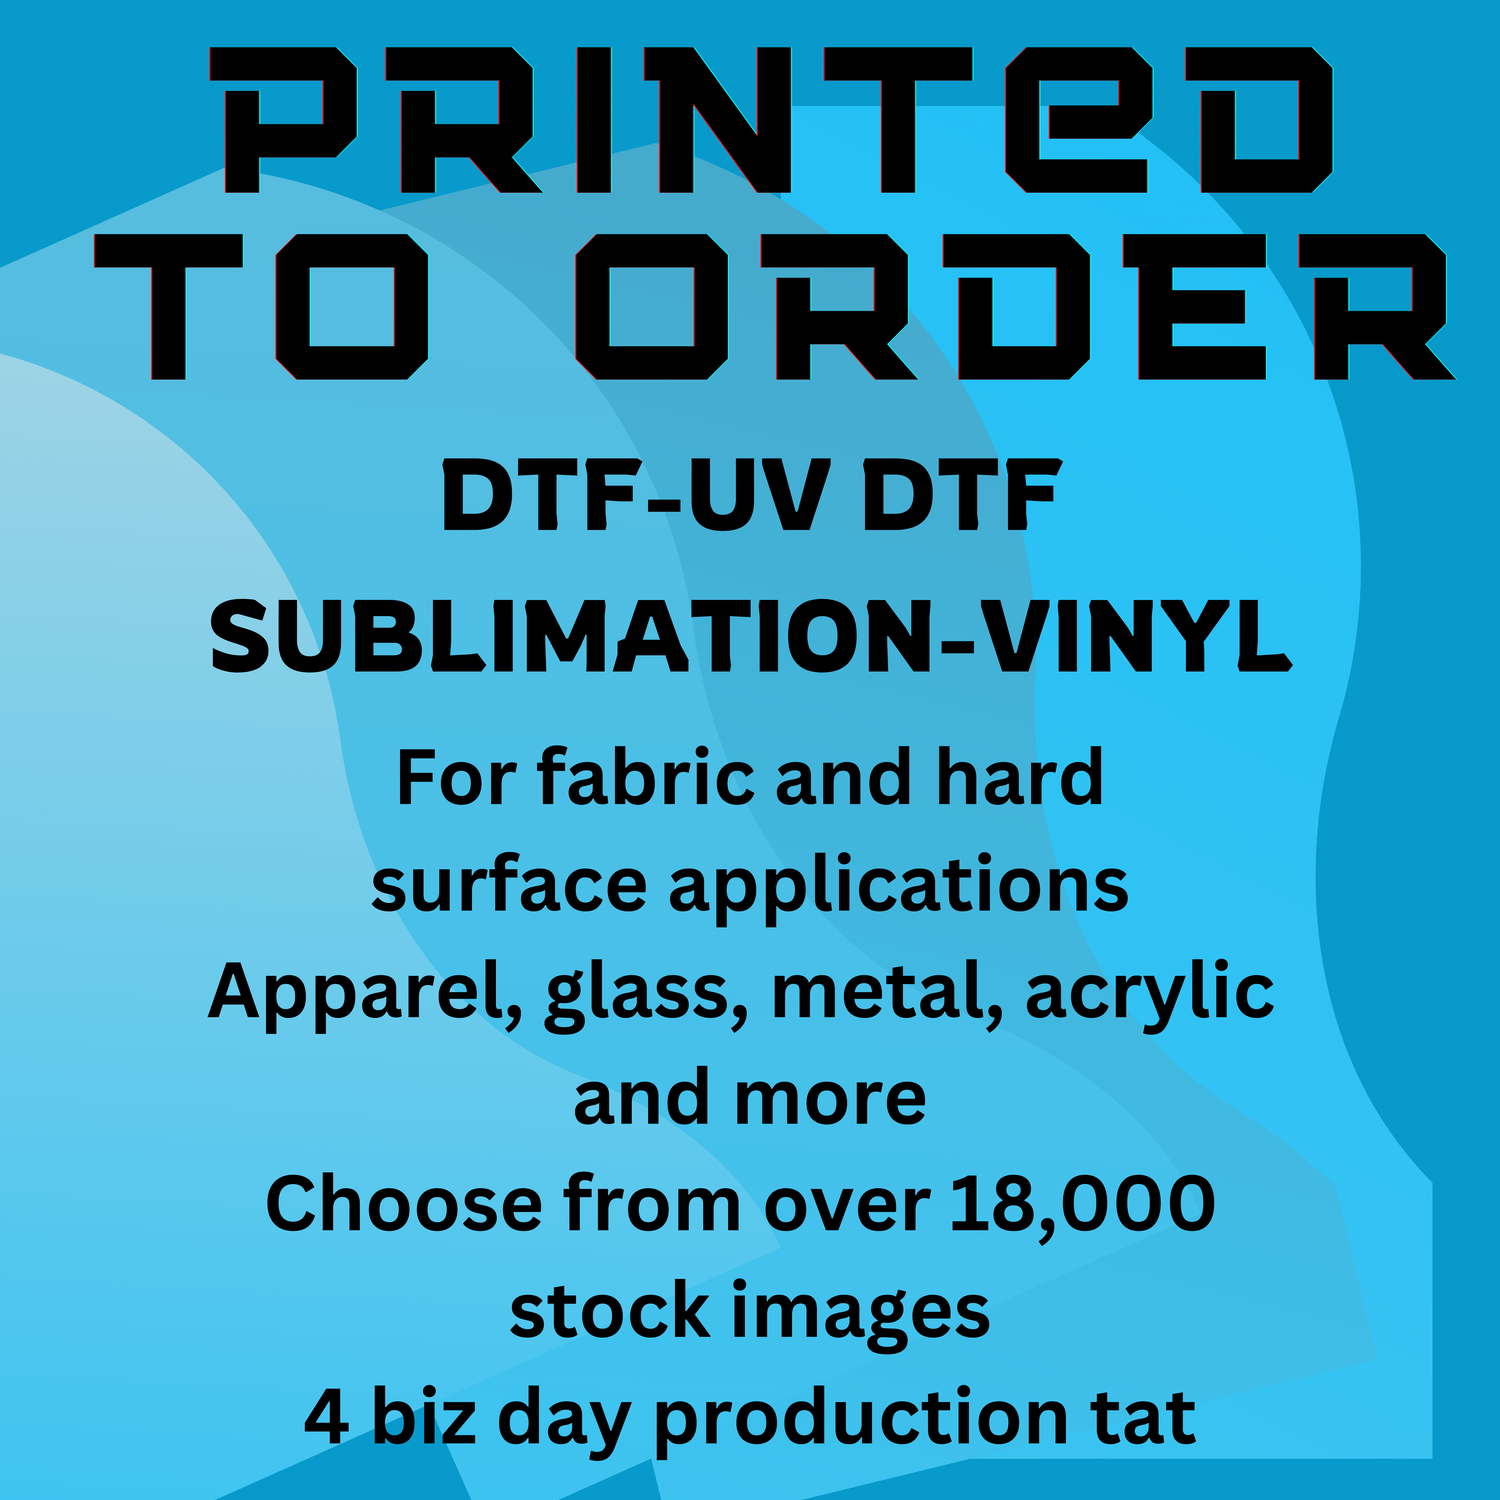 Choose from our designs - for Fabric or Hard surface transfers and decals